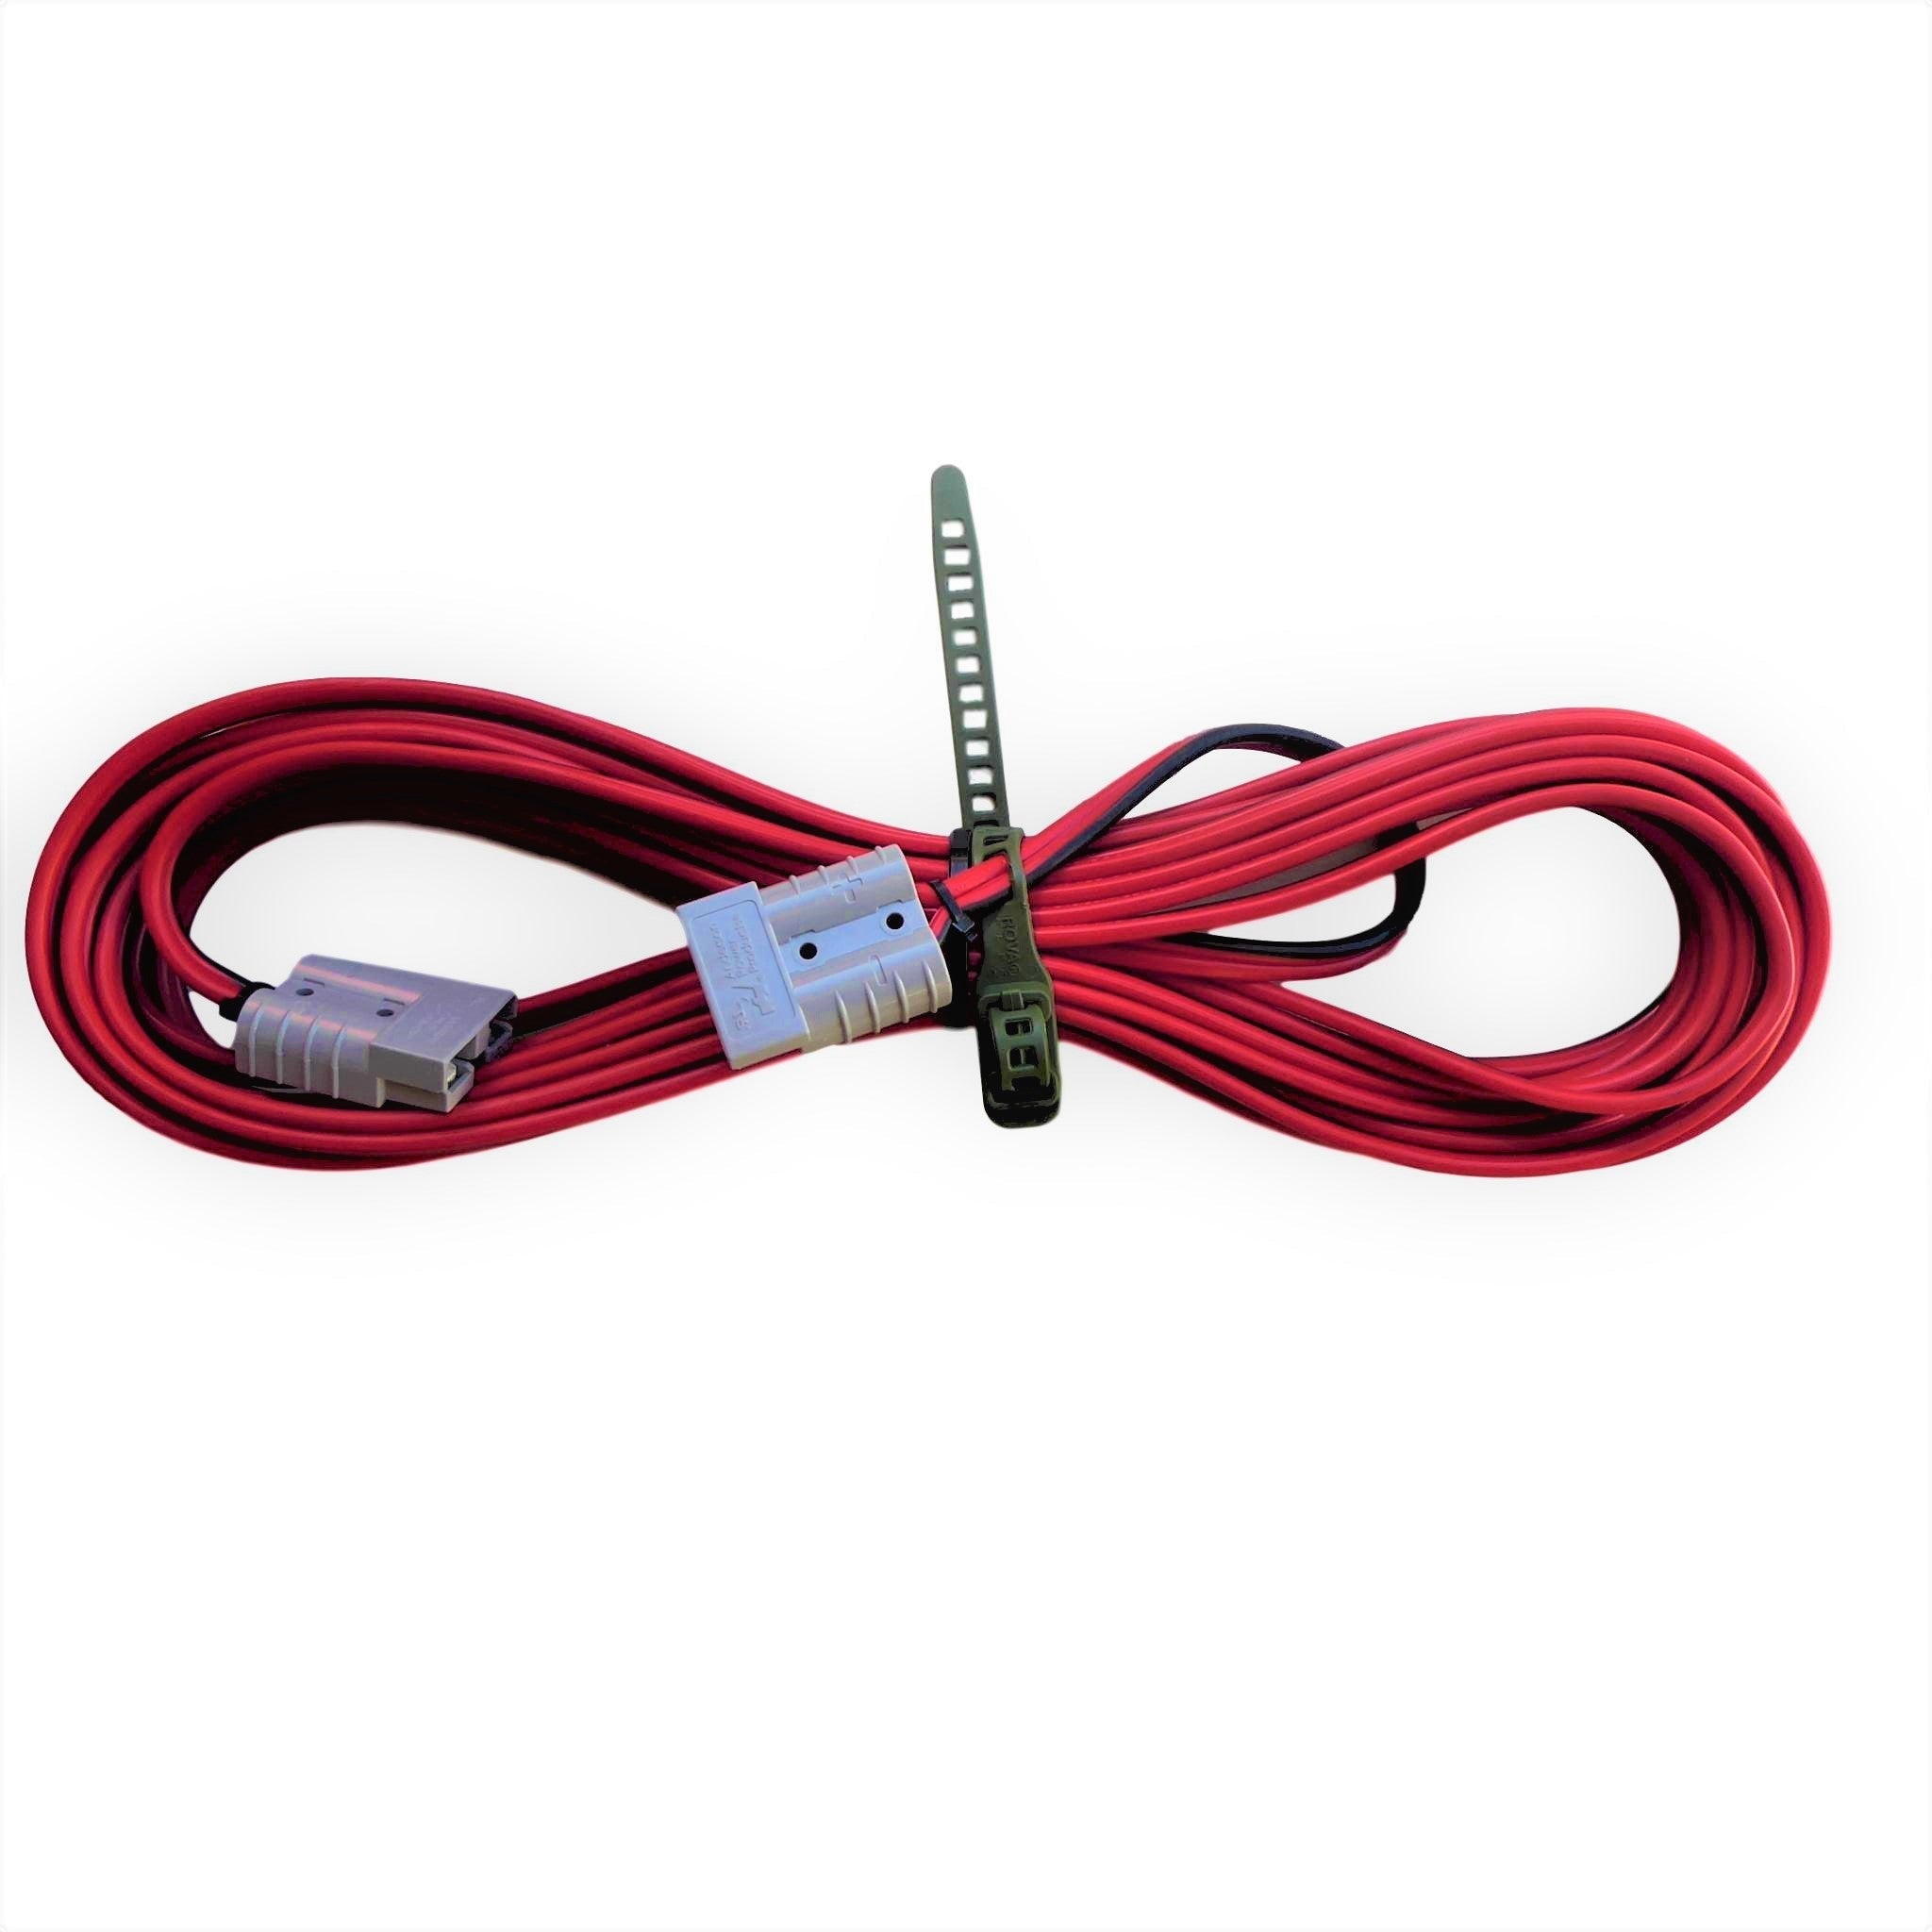 COMBO LITHIUM700, KAROO230W, 10M EXTENSION CABLE - PLUG AND PLAY